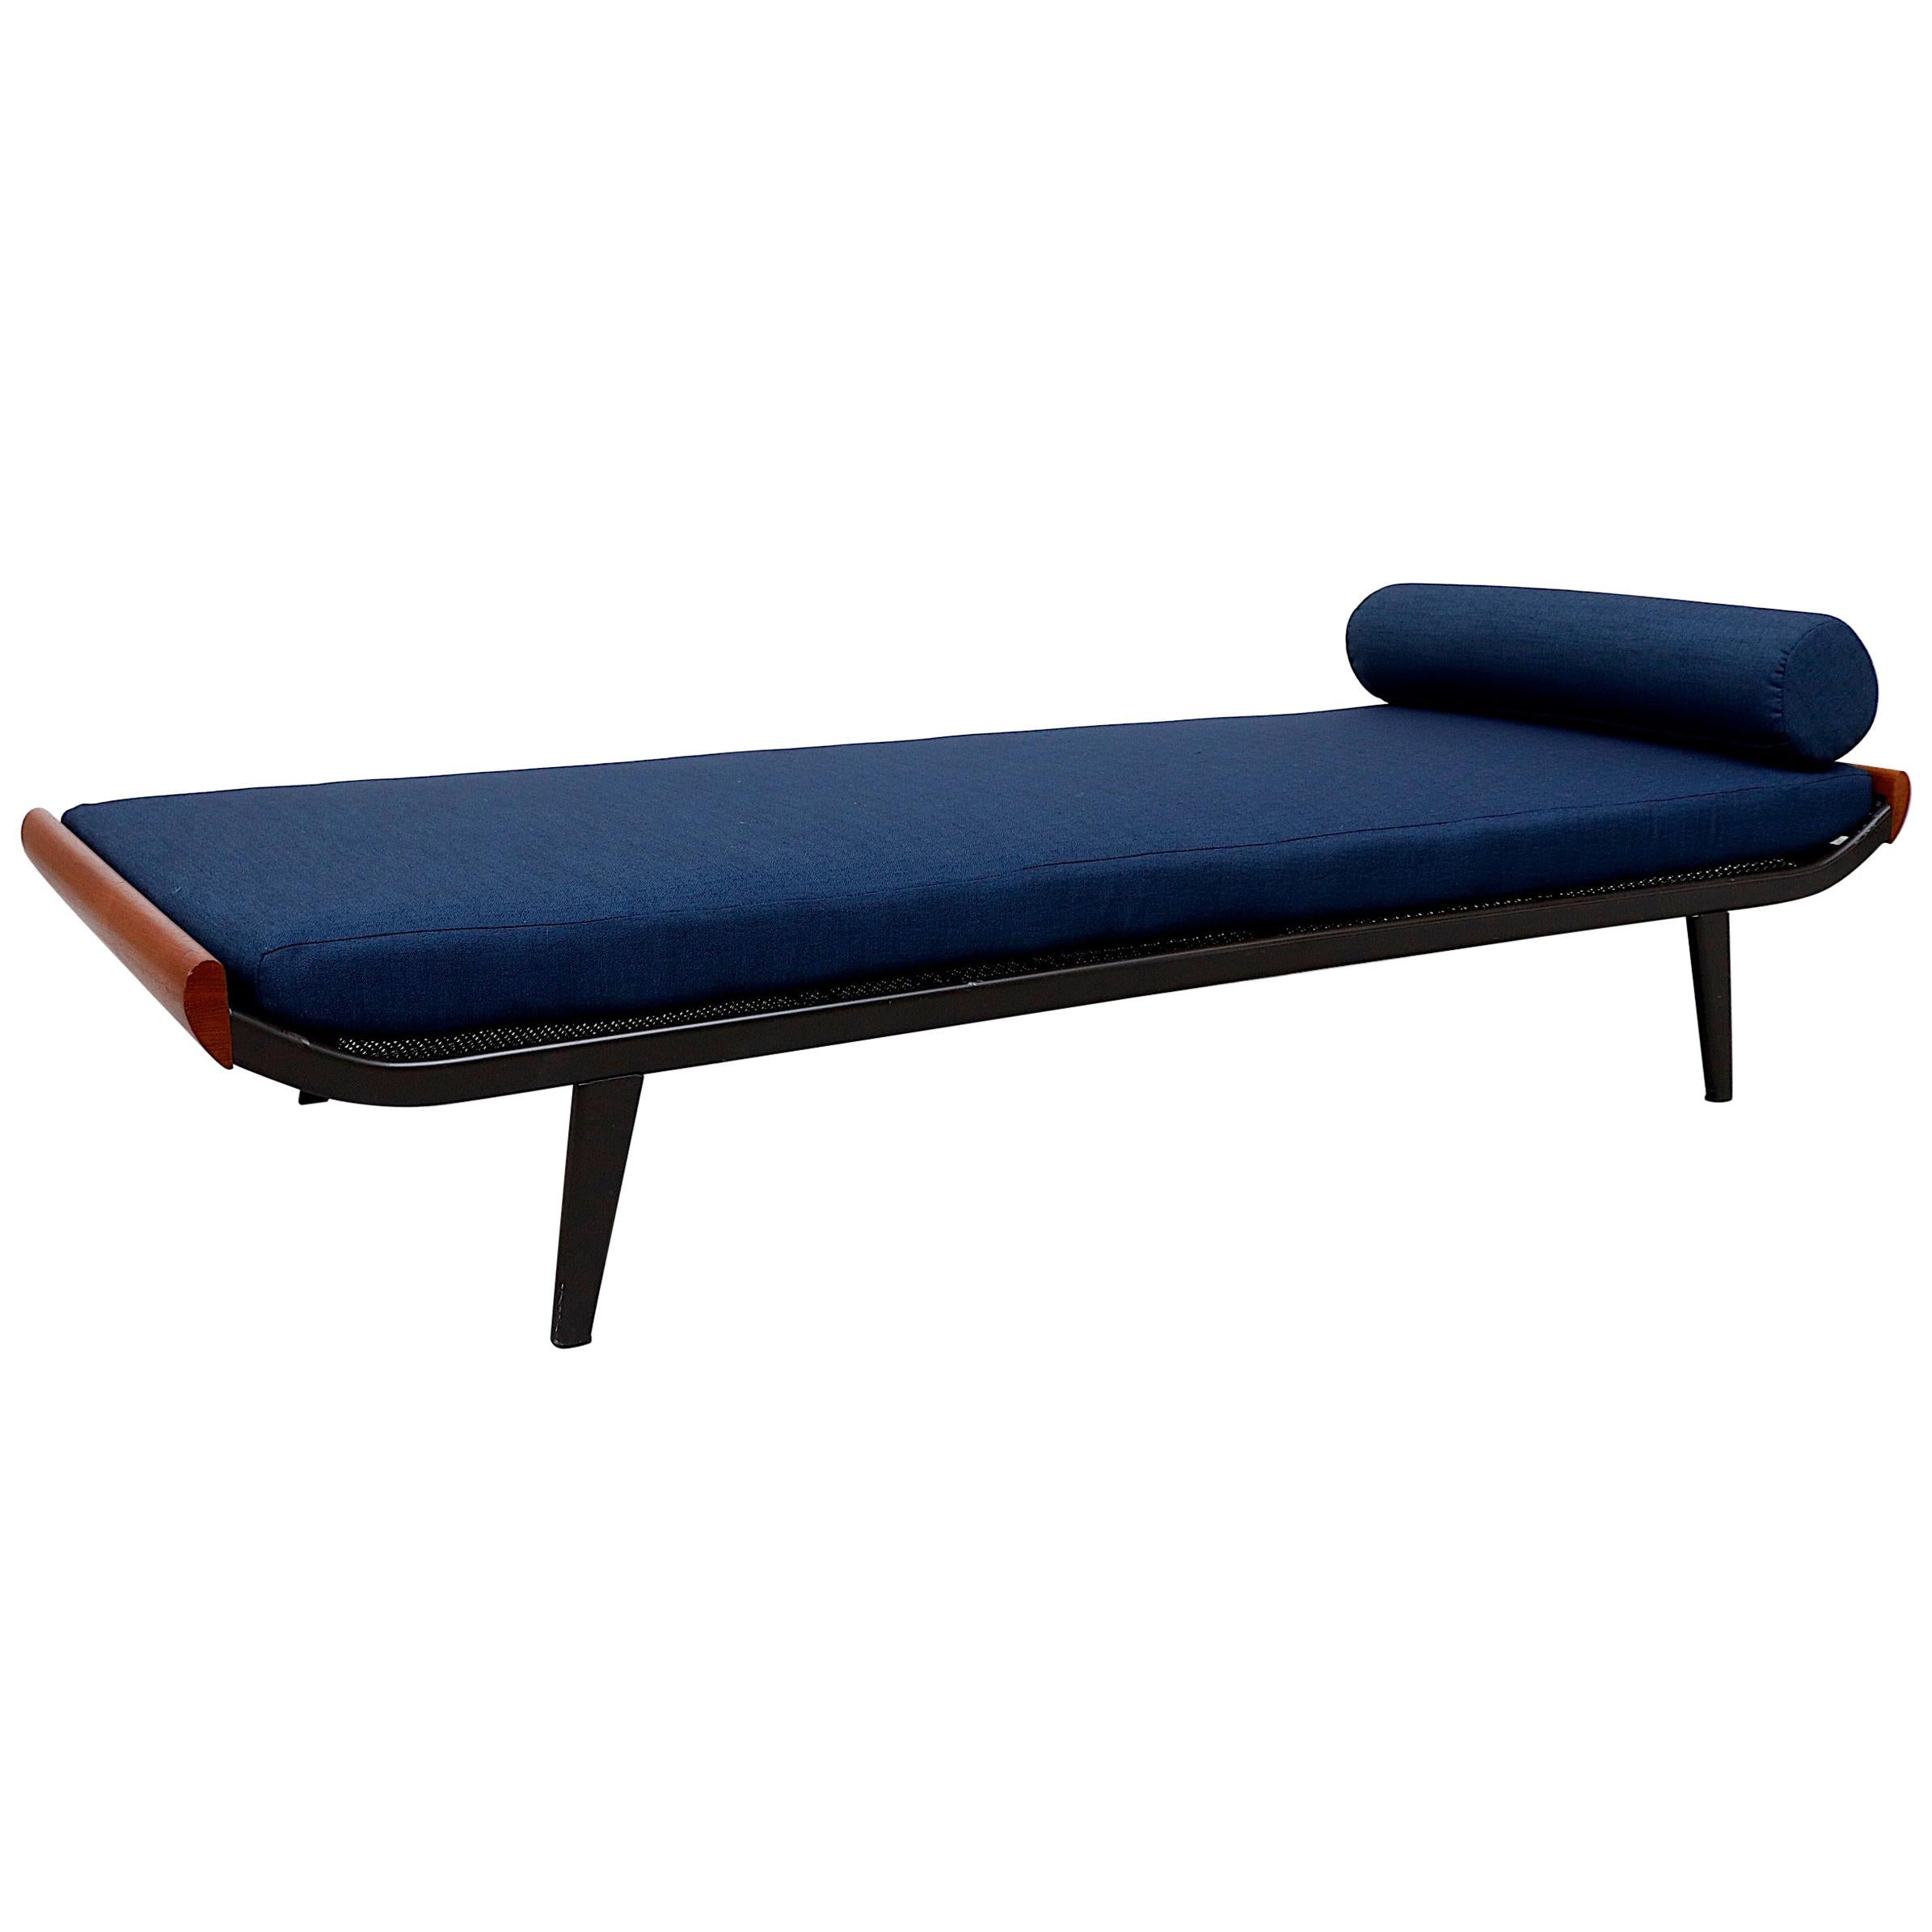 A.R. Cordemeyer "Cleopatra" Daybed for Auping